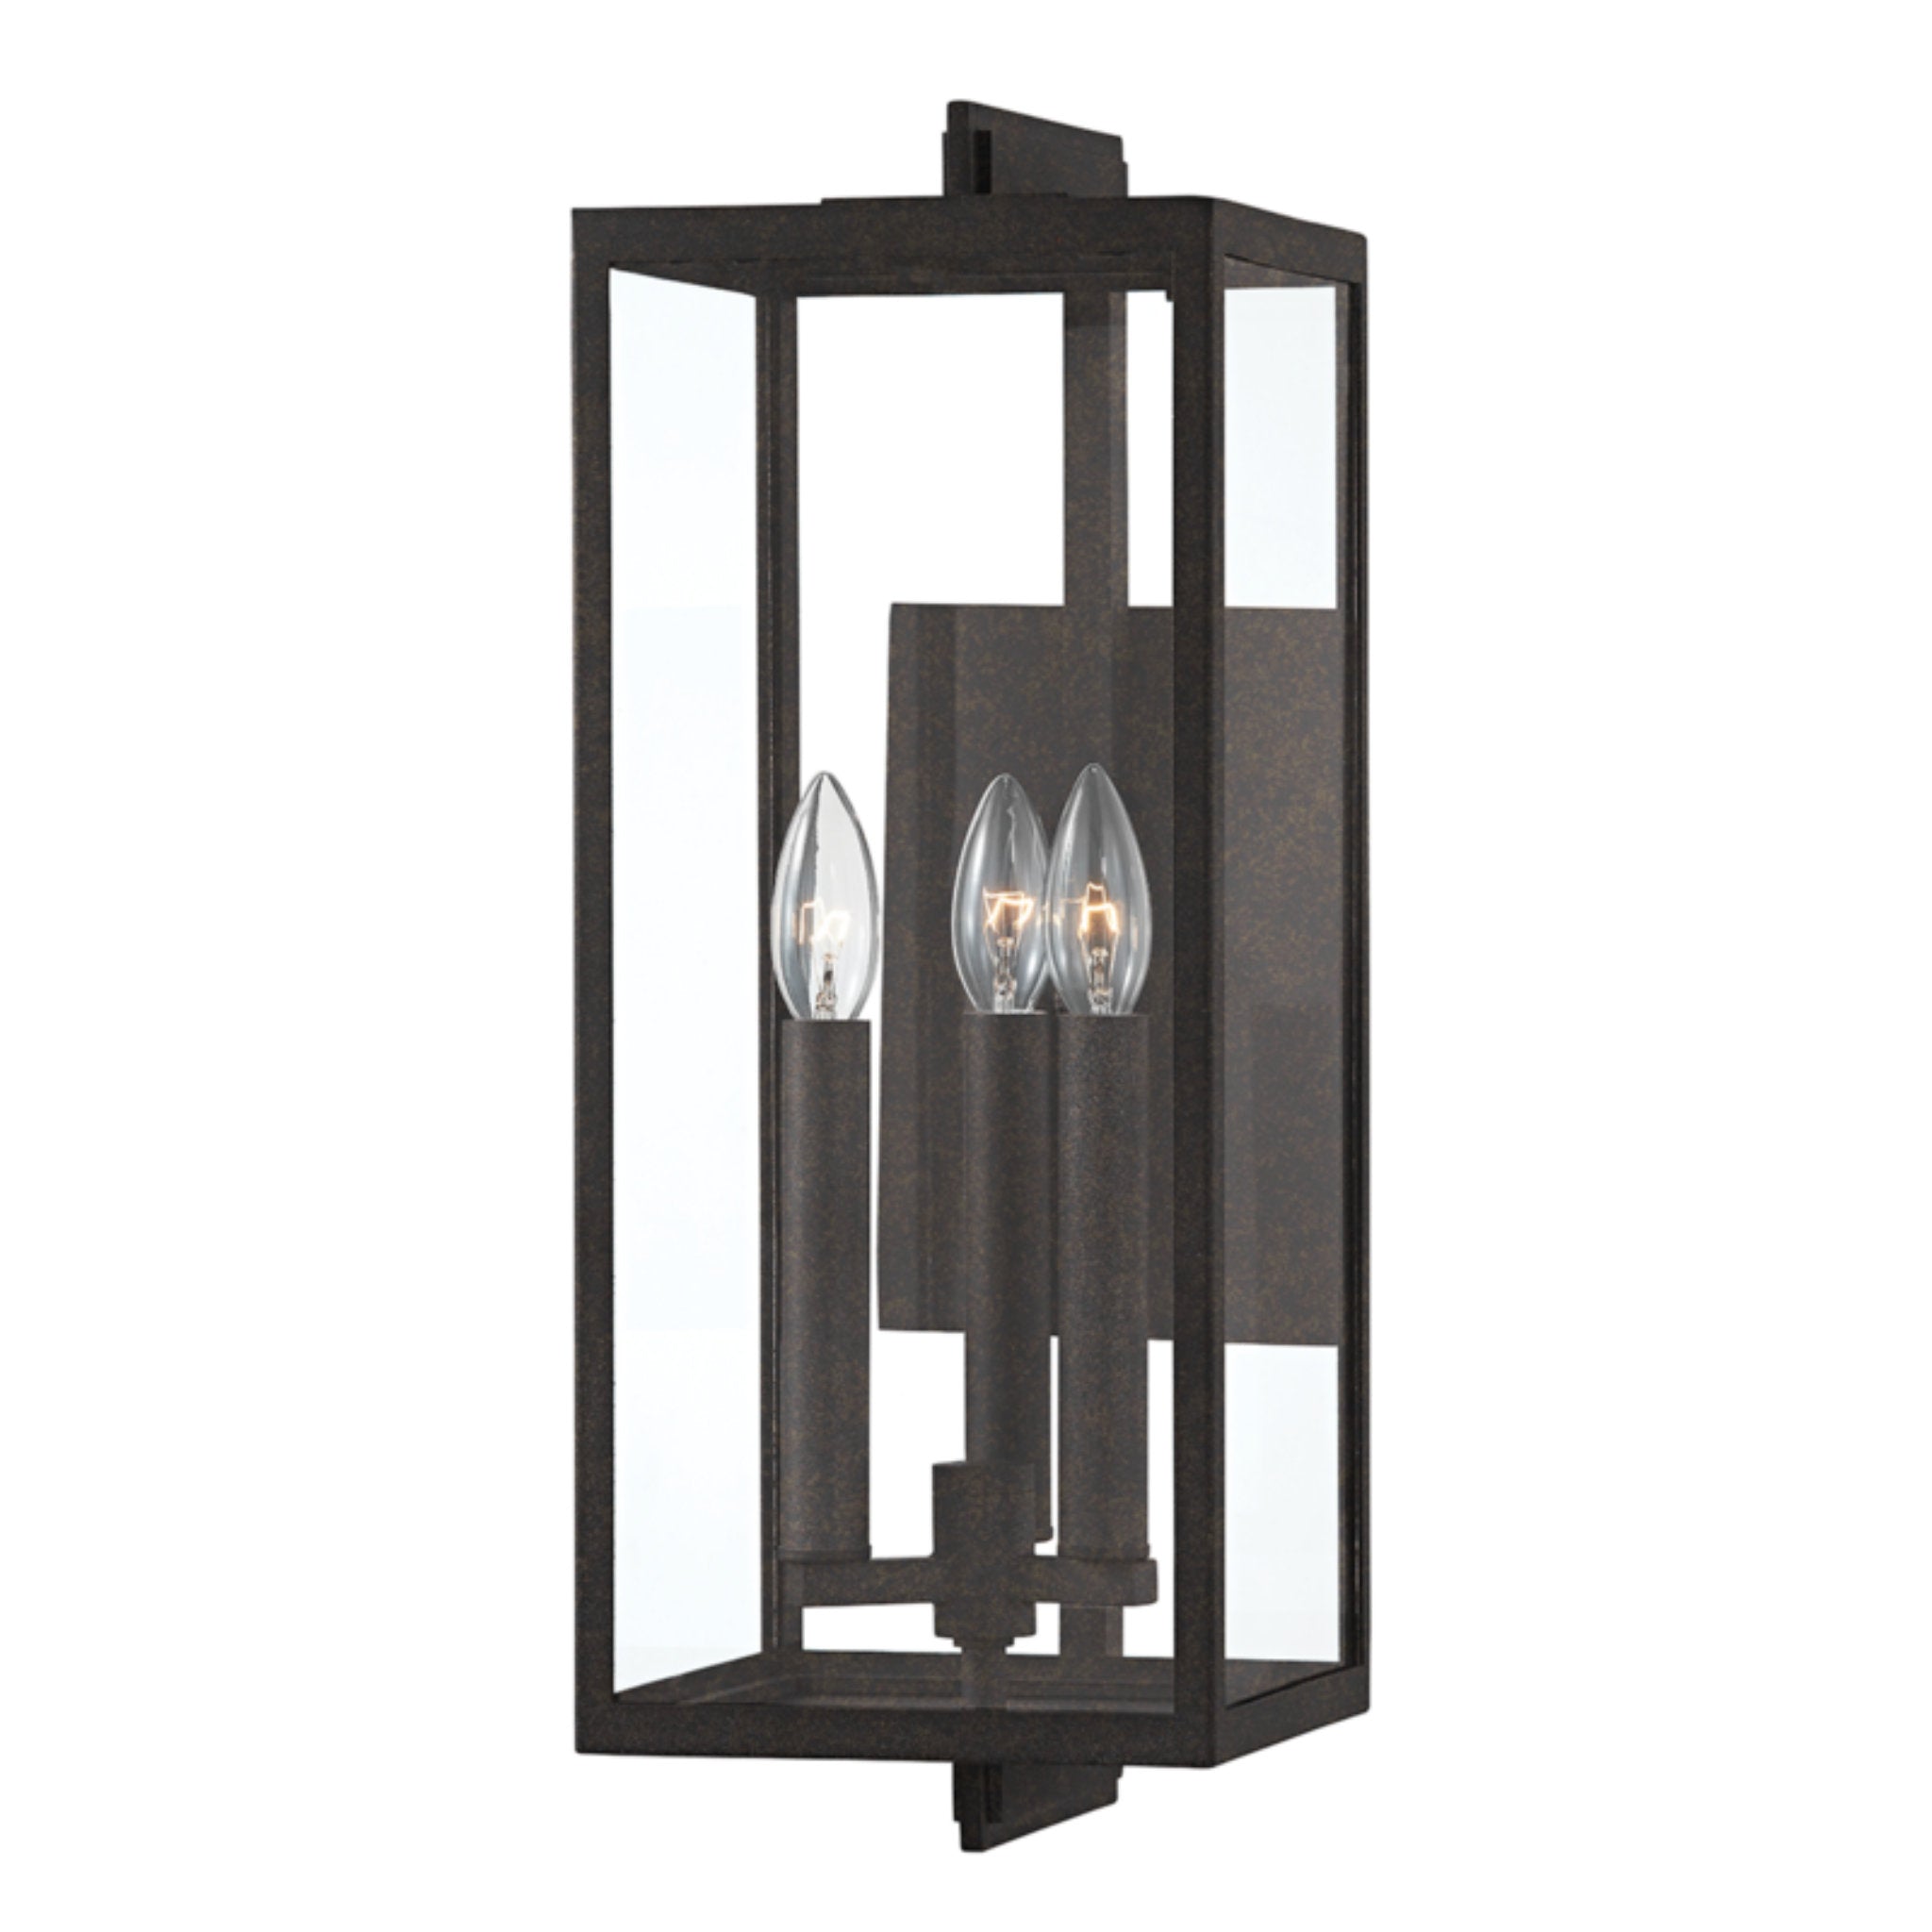 Nico 3 Light Wall Sconce in French Iron